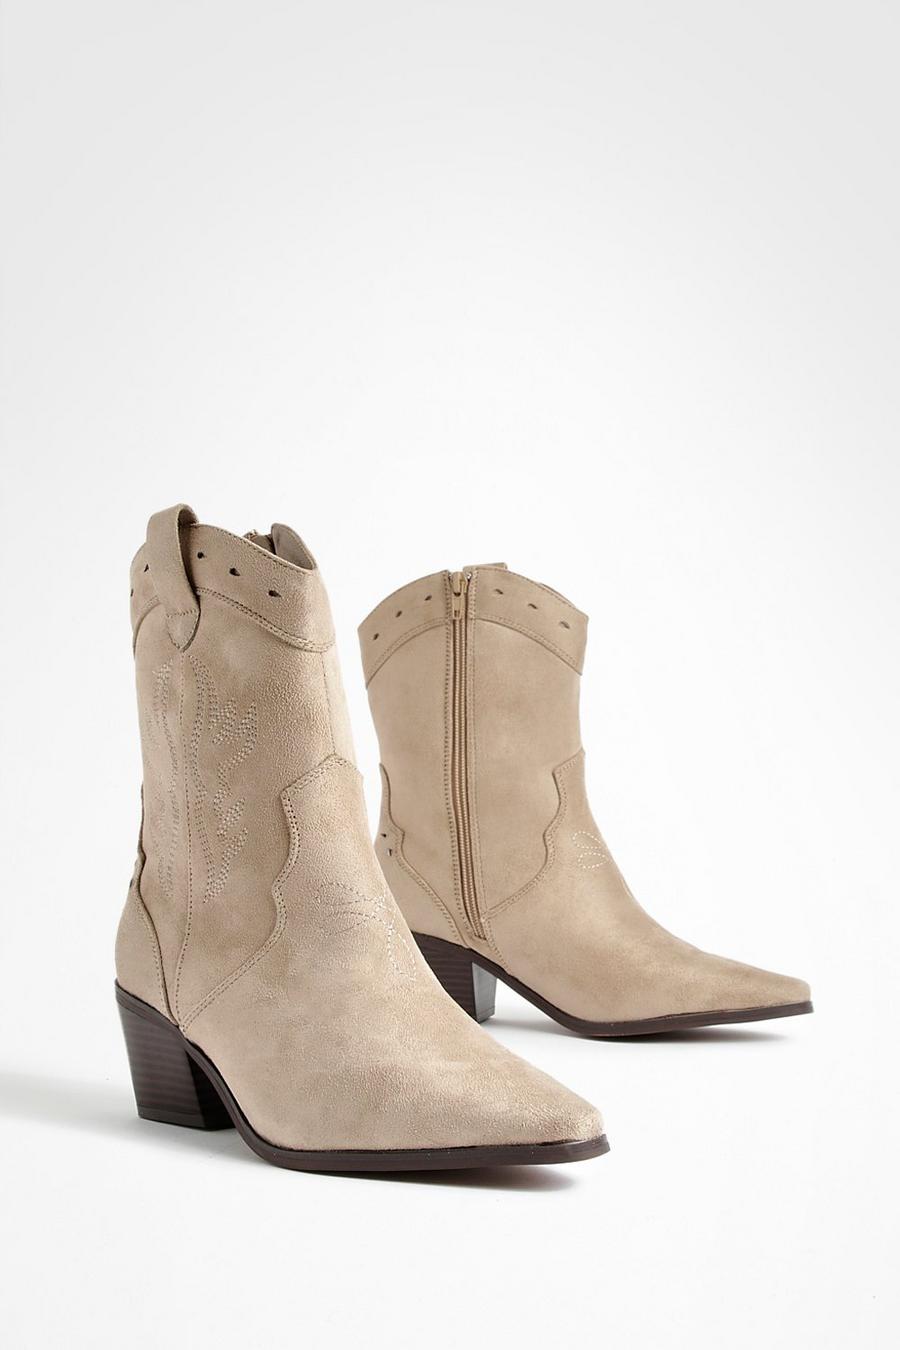 Taupe LEATHER ANKLE BOOT BUCKLE STRAP FEATURE